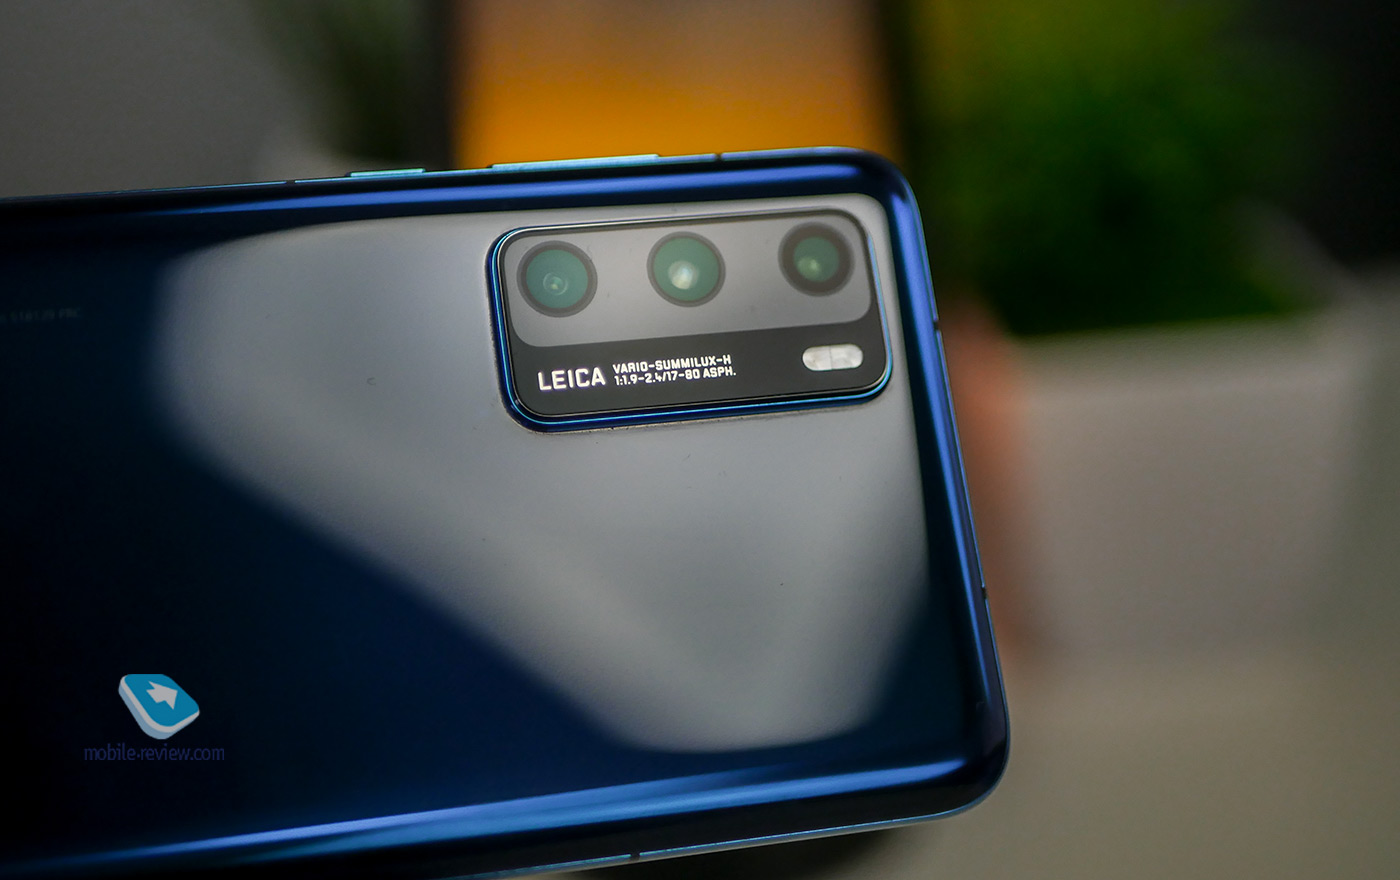 Huawei P40 smartphone review - tried to be a compact flagship